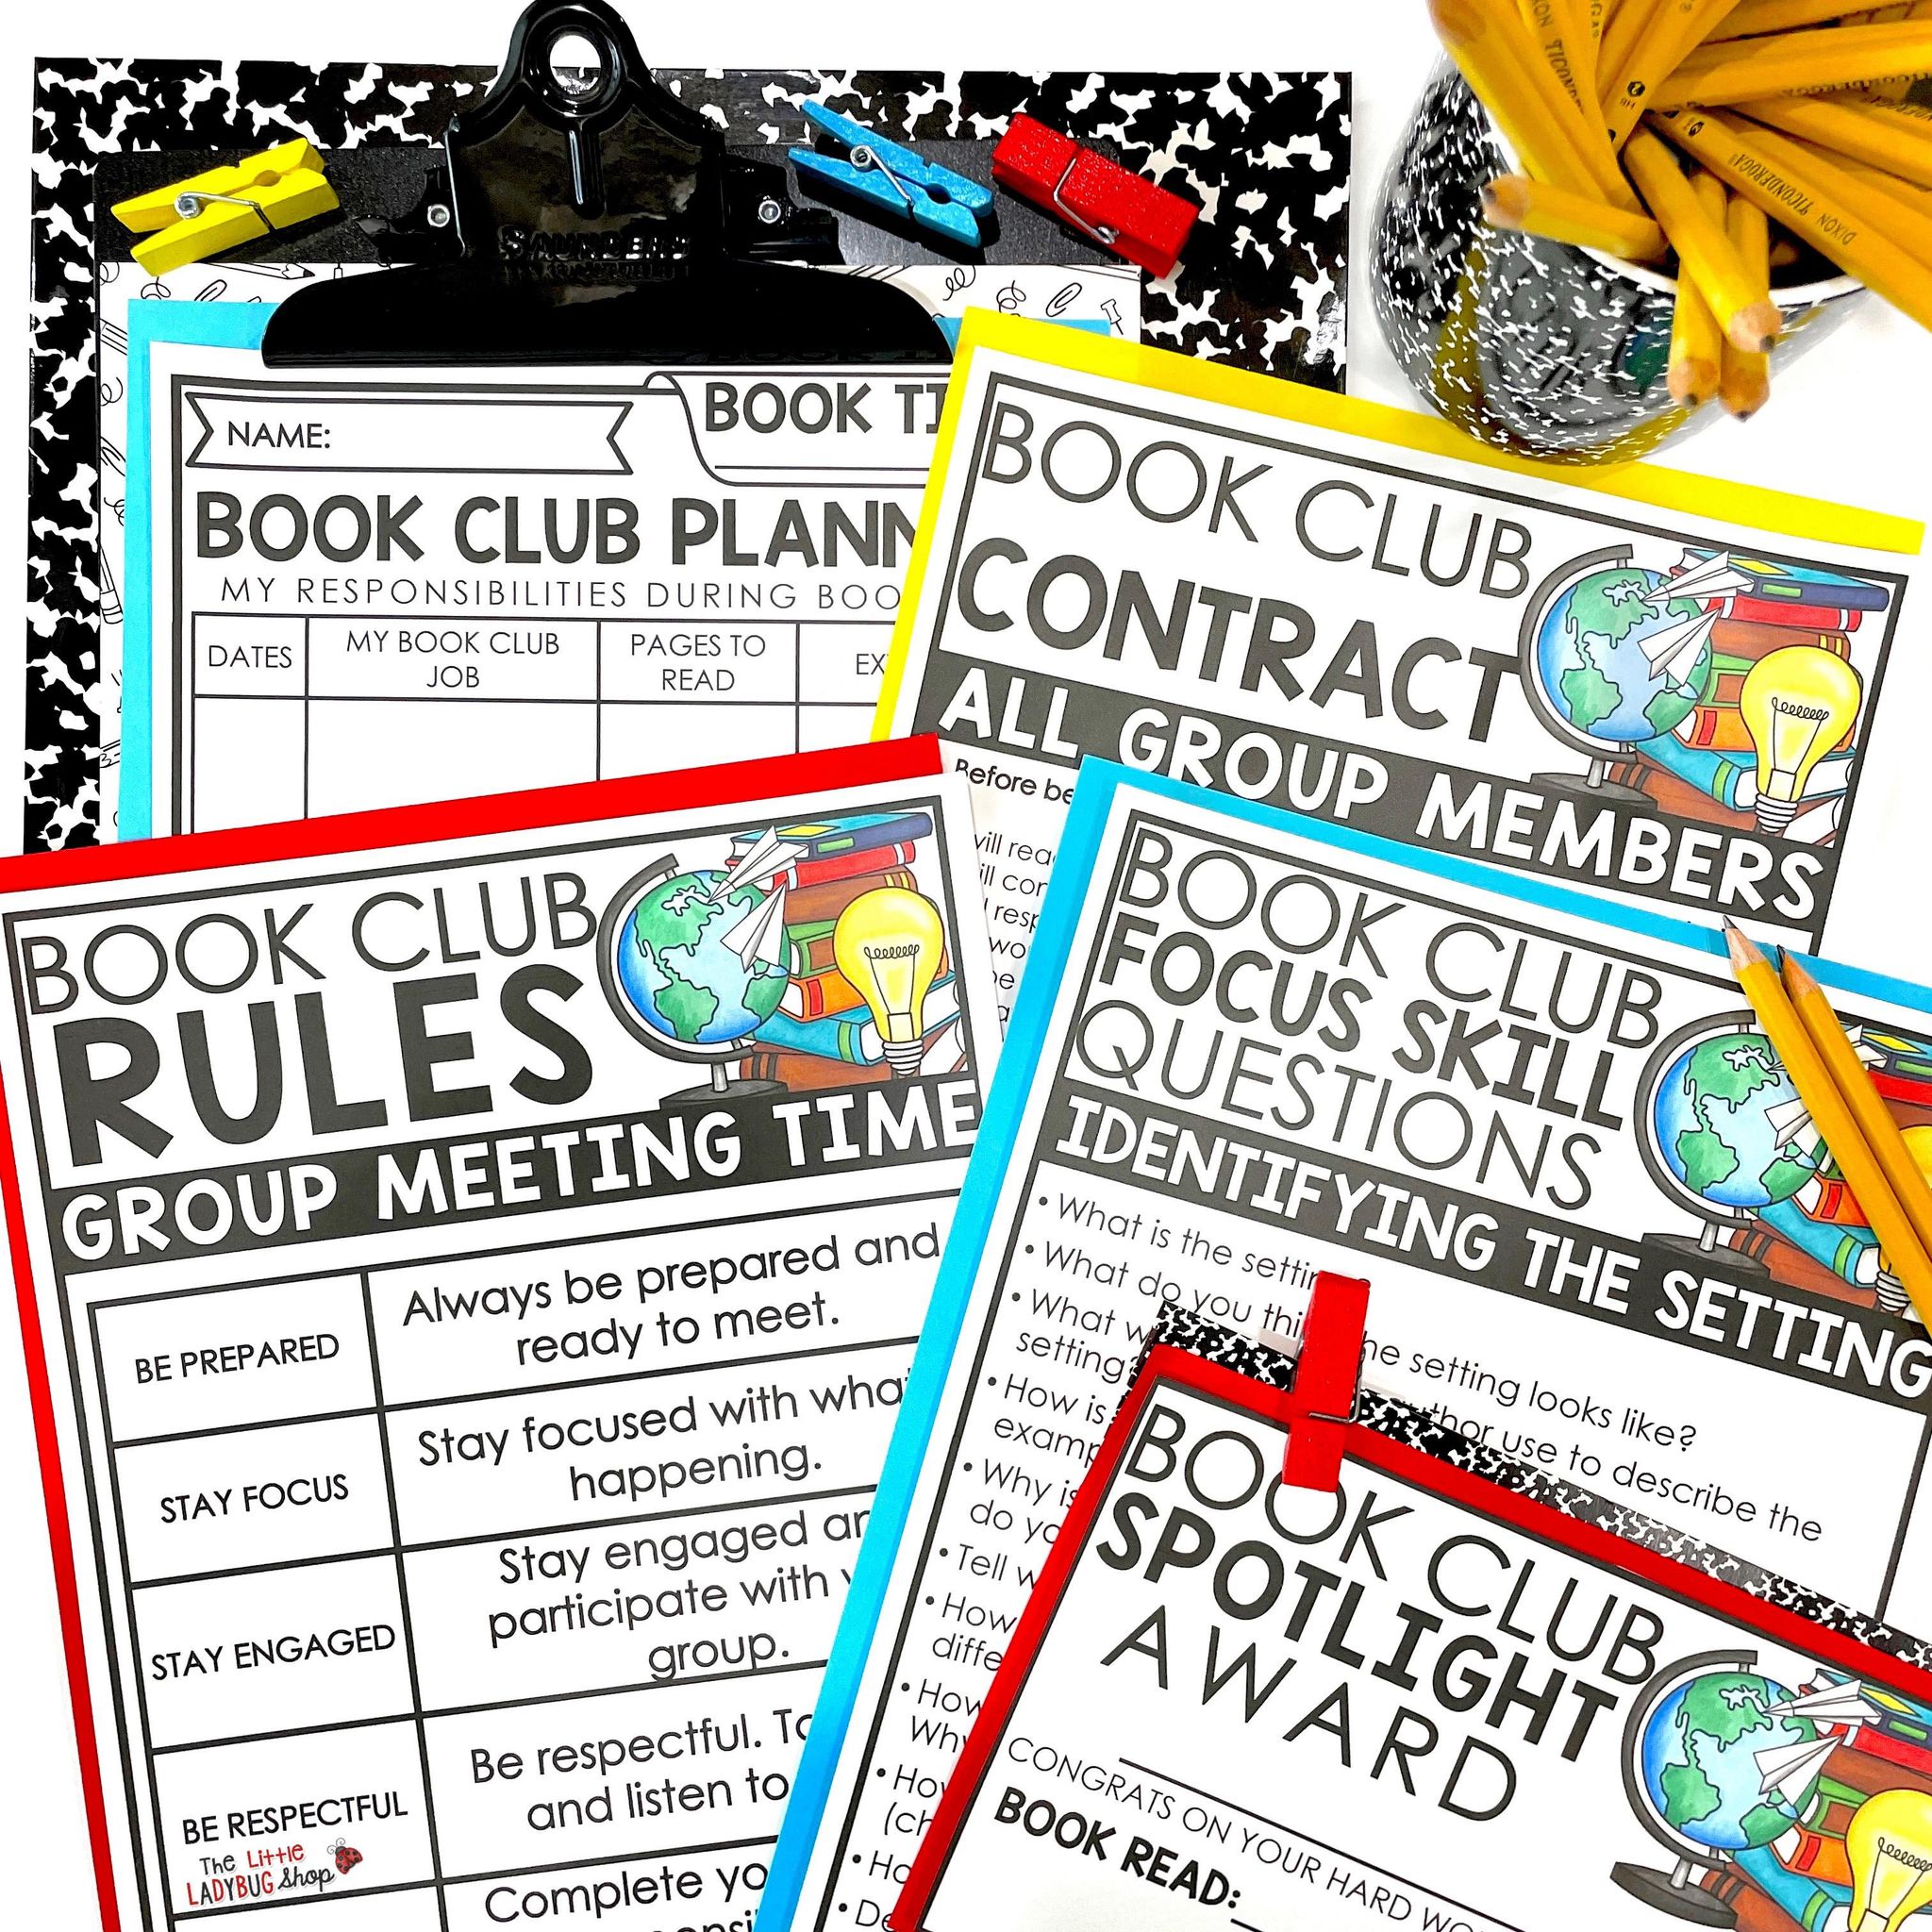 Book Clubs and Literature Circles Activities in Upper Elementary